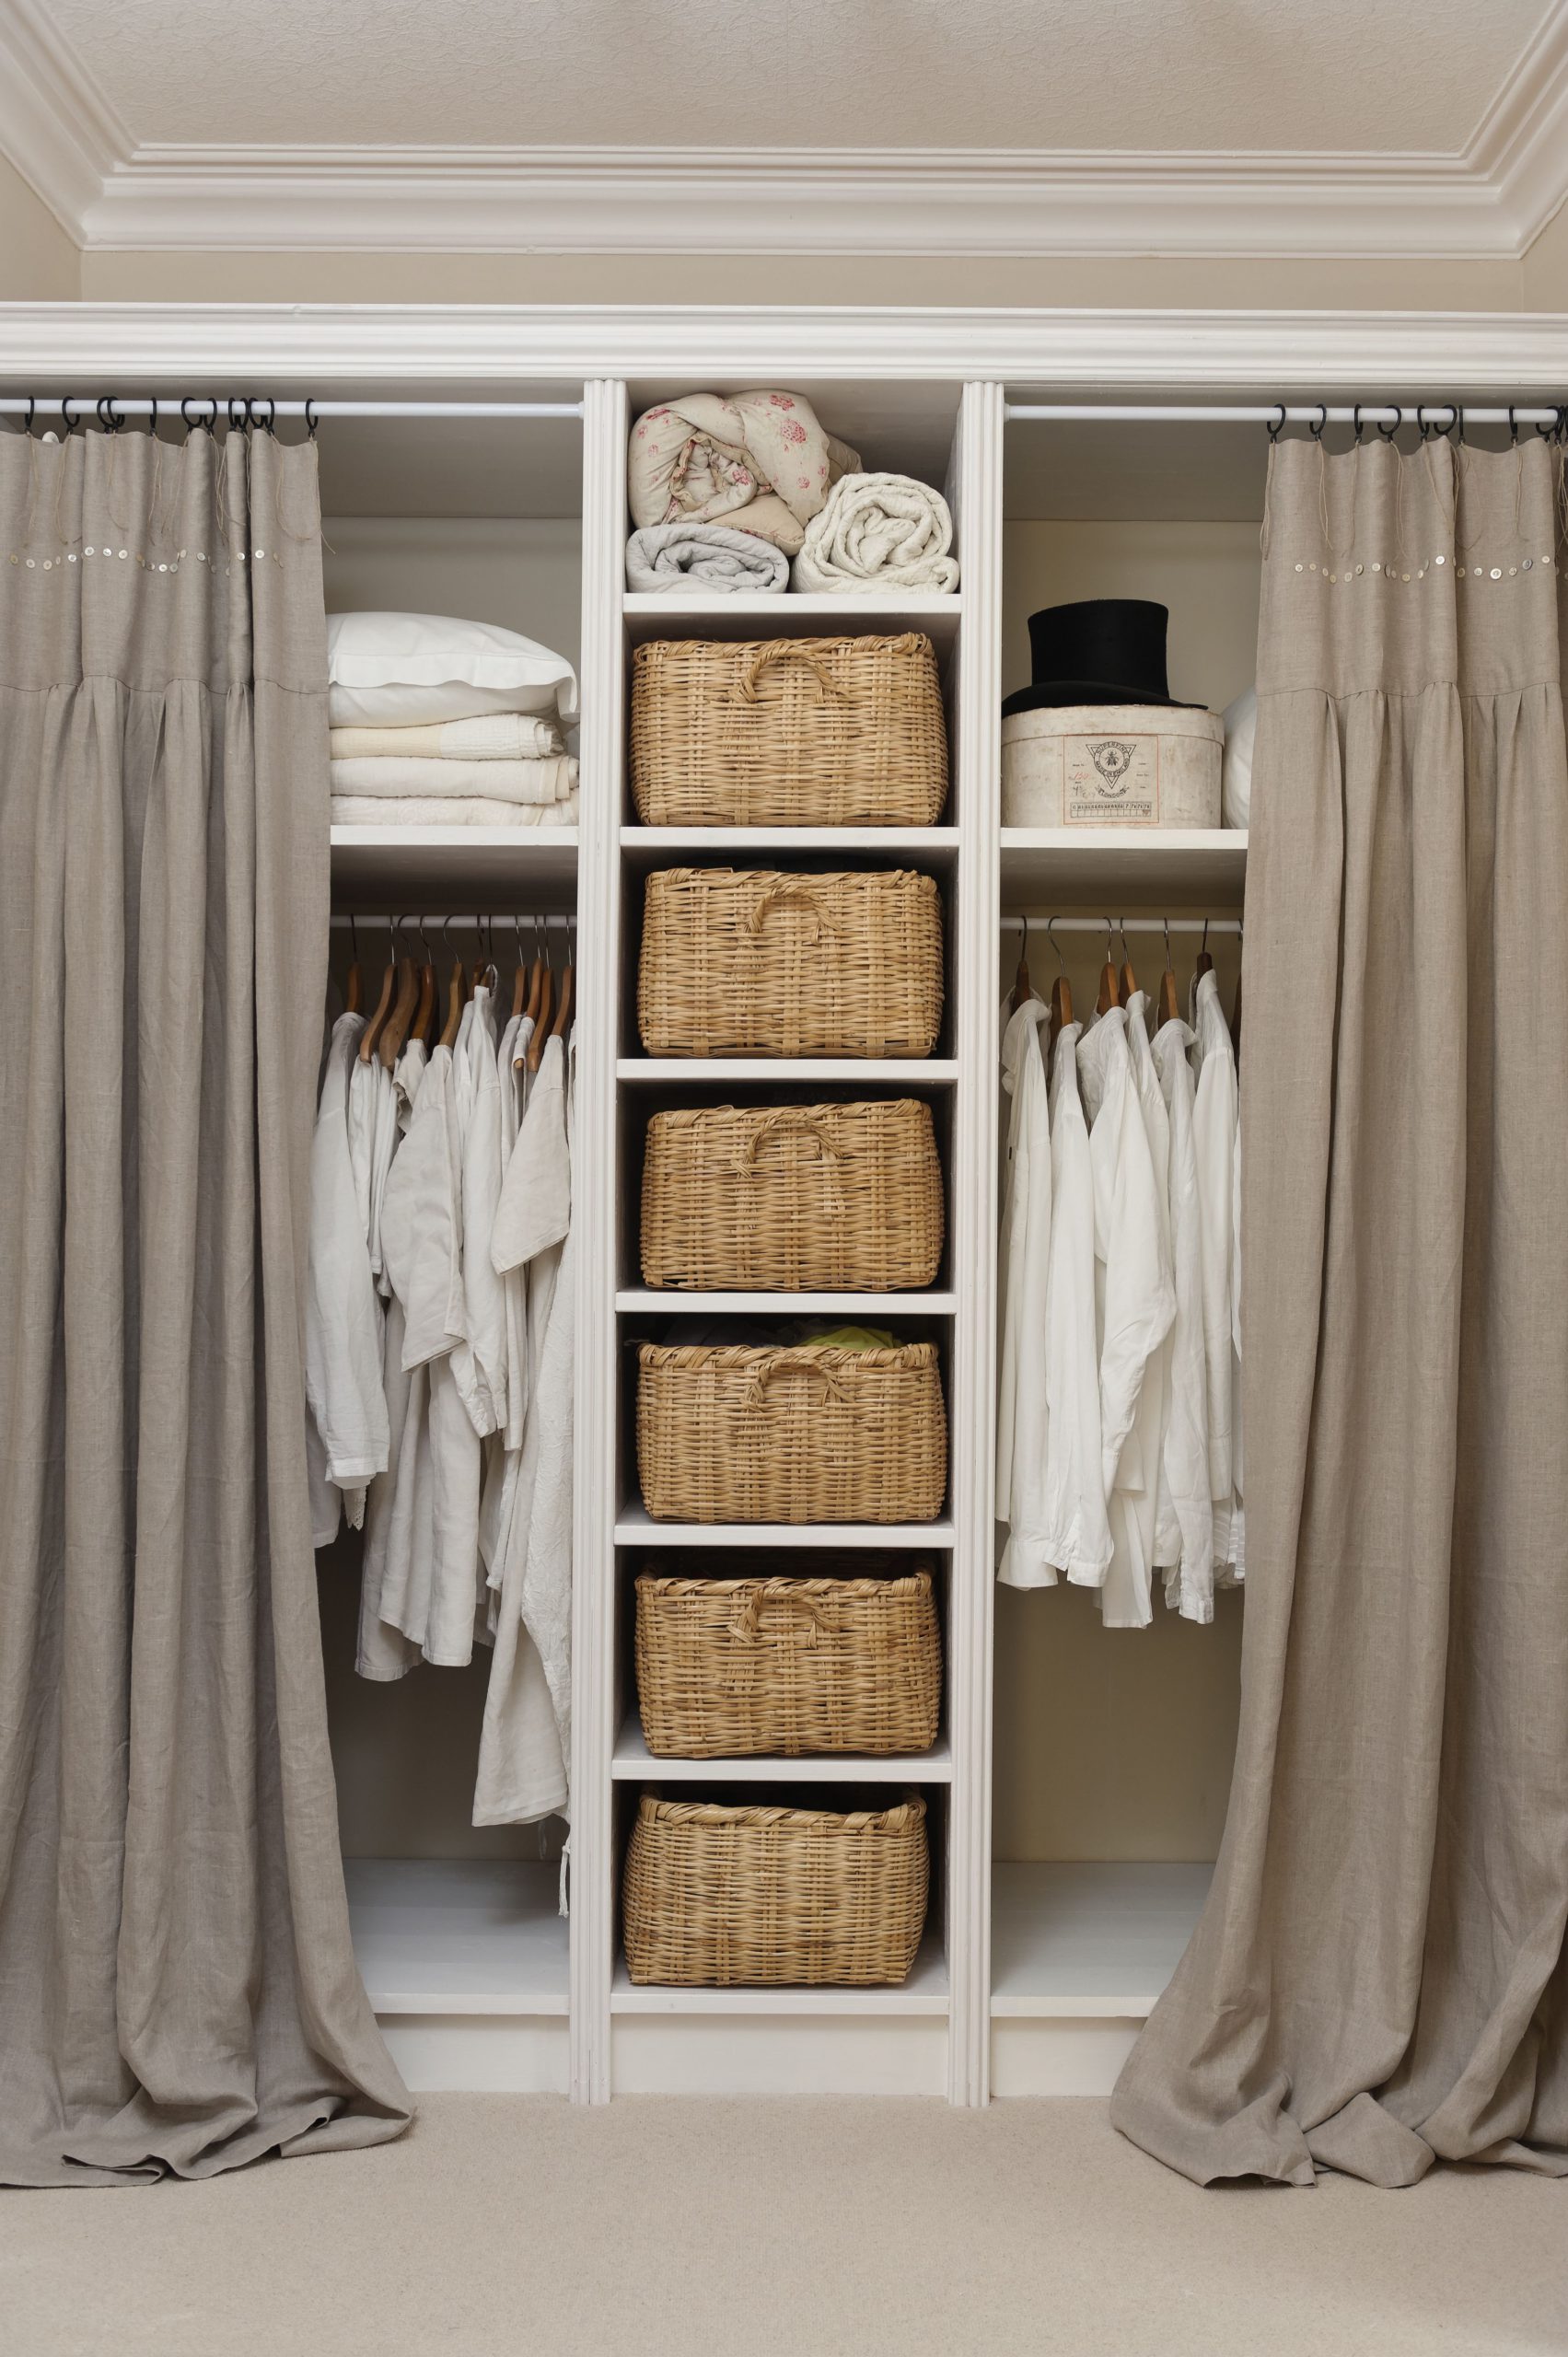 Walk-in Closet with Curtain